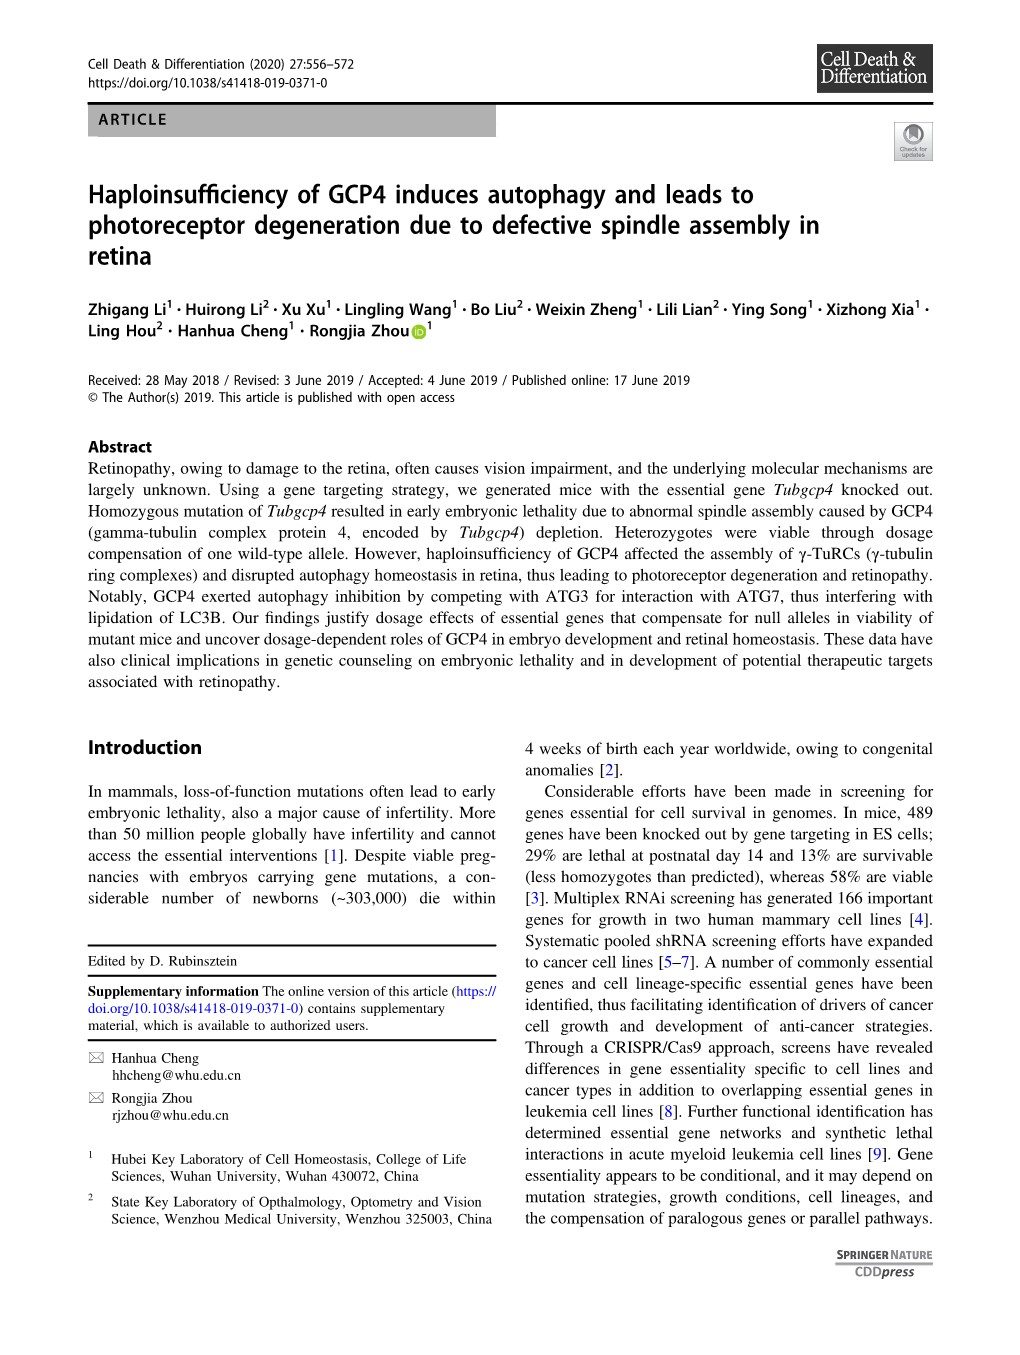 Haploinsufficiency of GCP4 Induces Autophagy and Leads To